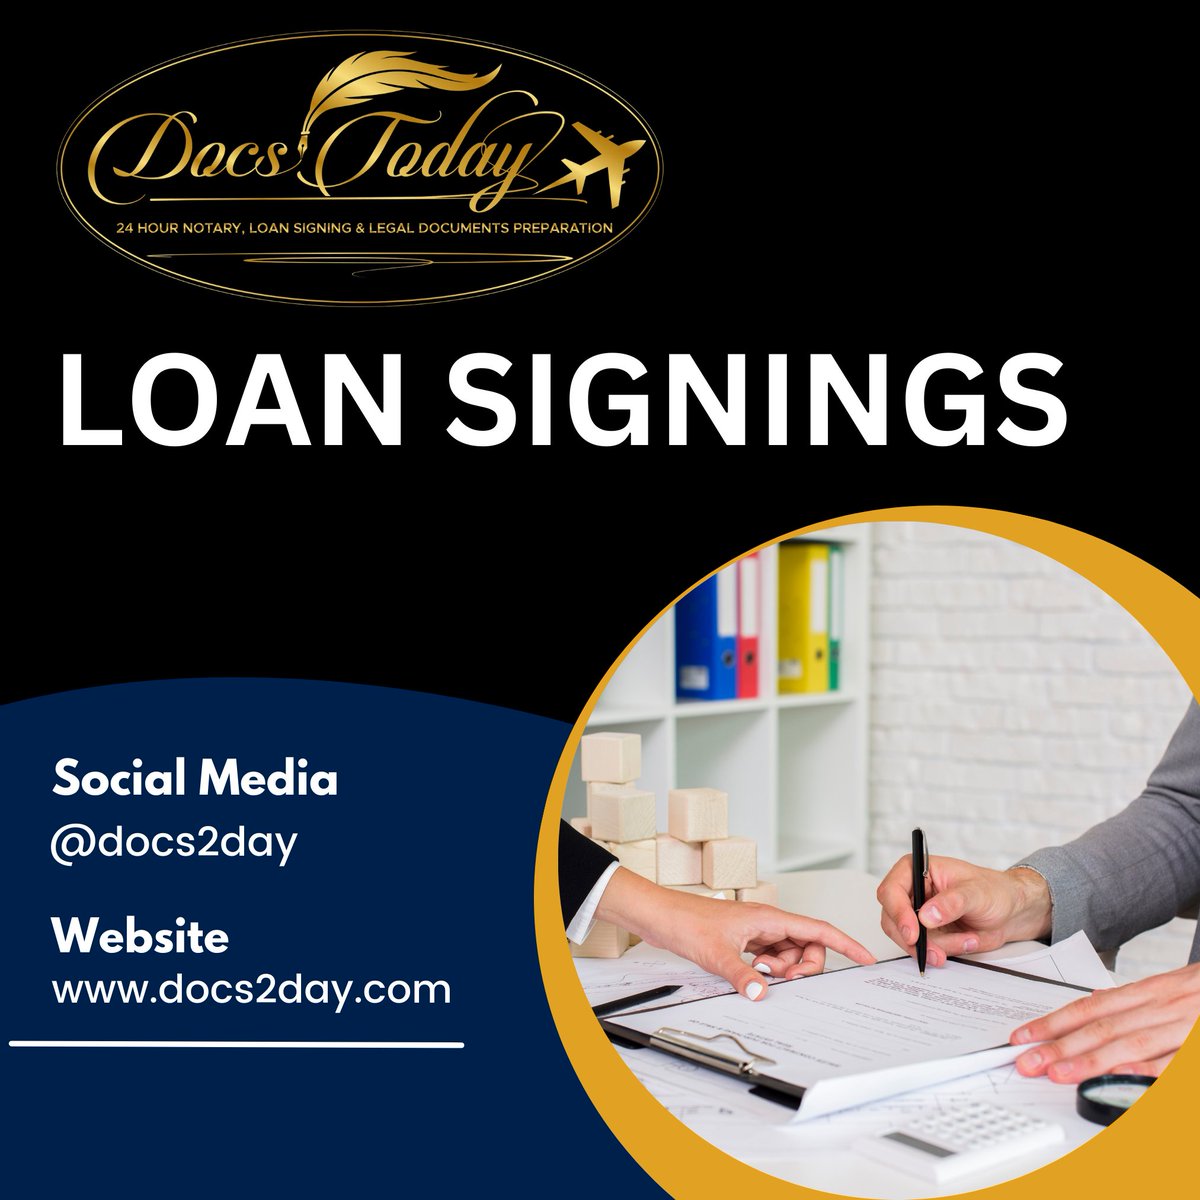 𝐋𝐎𝐀𝐍 𝐒𝐈𝐆𝐍𝐈𝐍𝐆𝐒

𝙑𝙞𝙨𝙞𝙩 𝙪𝙨: docs2day.com

#LoanSigning #NotaryPublic #MortgageSigning #LoanSigningAgent #RealEstateClosing #NotarySigningAgent #MobileNotary #LoanDocuments #SigningService #LoanClosing #LoanOfficer #TitleCompany #HomeClosing